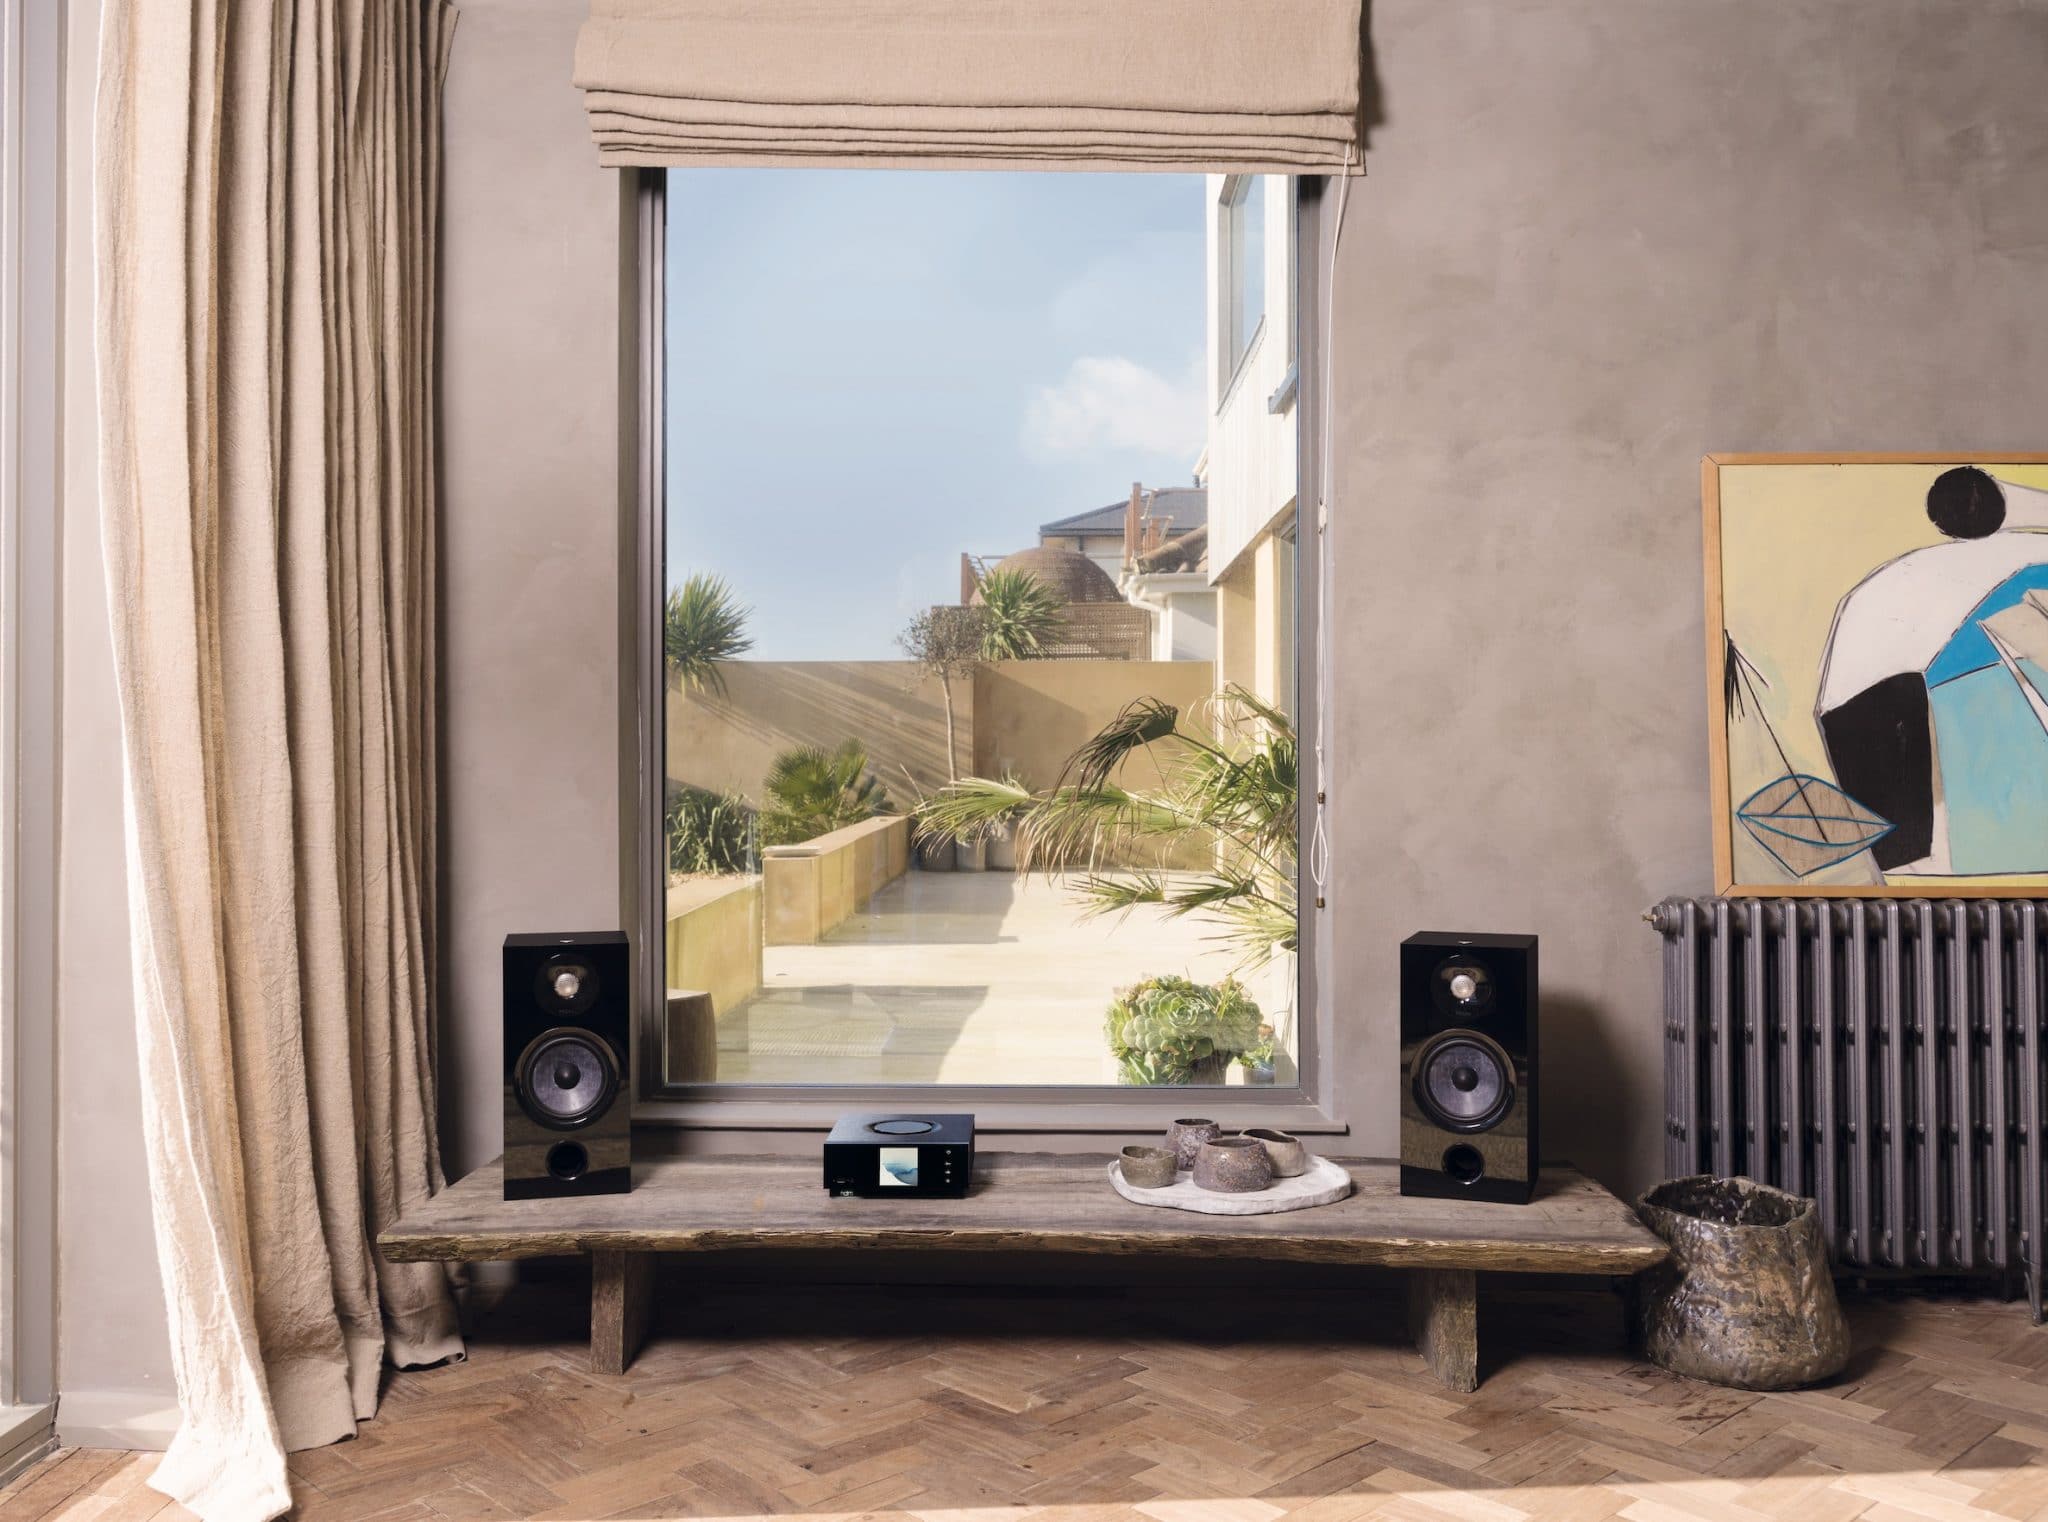 FOCAL & NAIM SYSTEMS AT SPECIAL PRICES